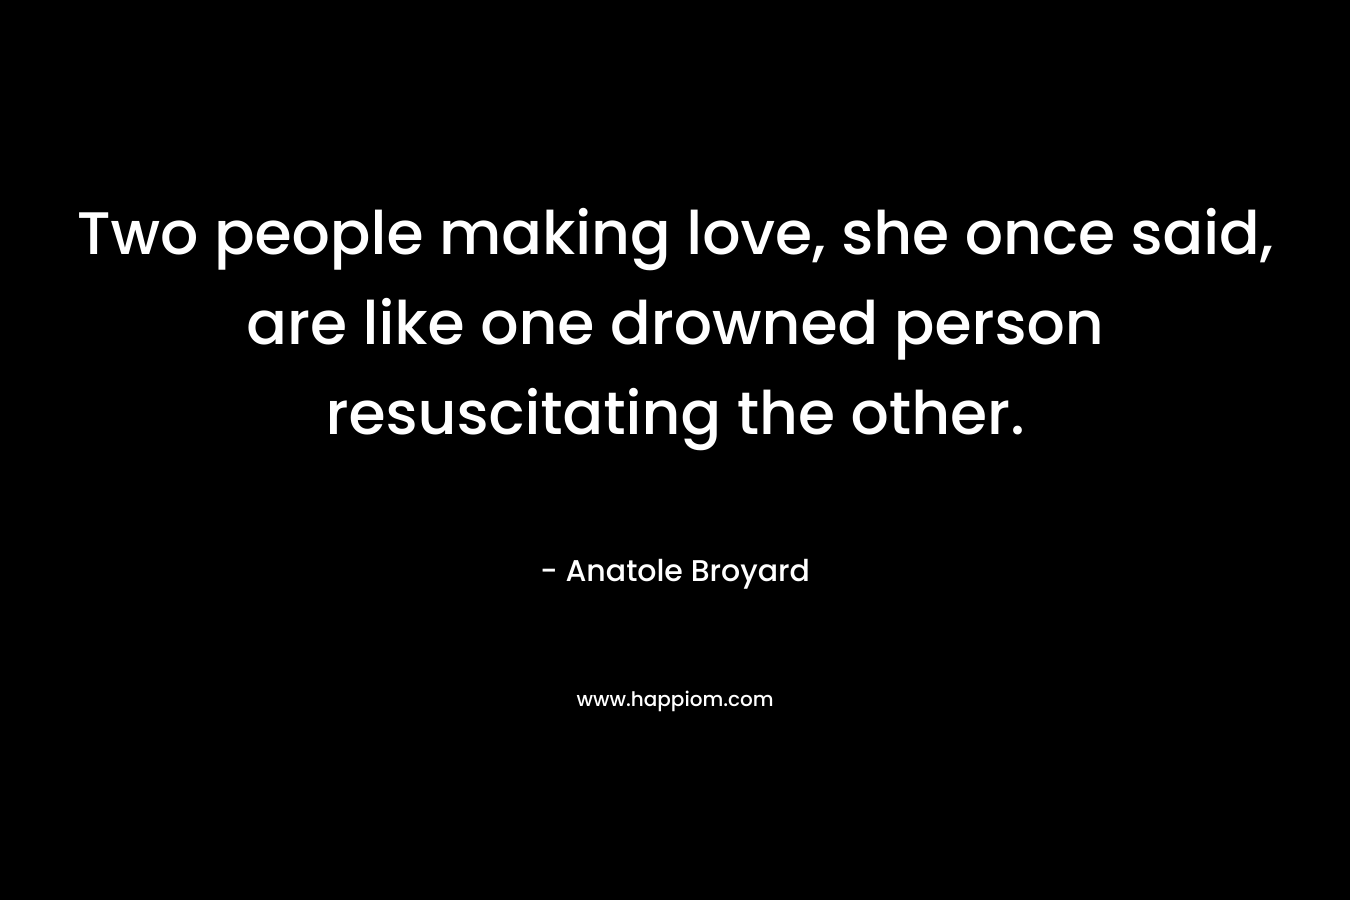 Two people making love, she once said, are like one drowned person resuscitating the other. – Anatole Broyard